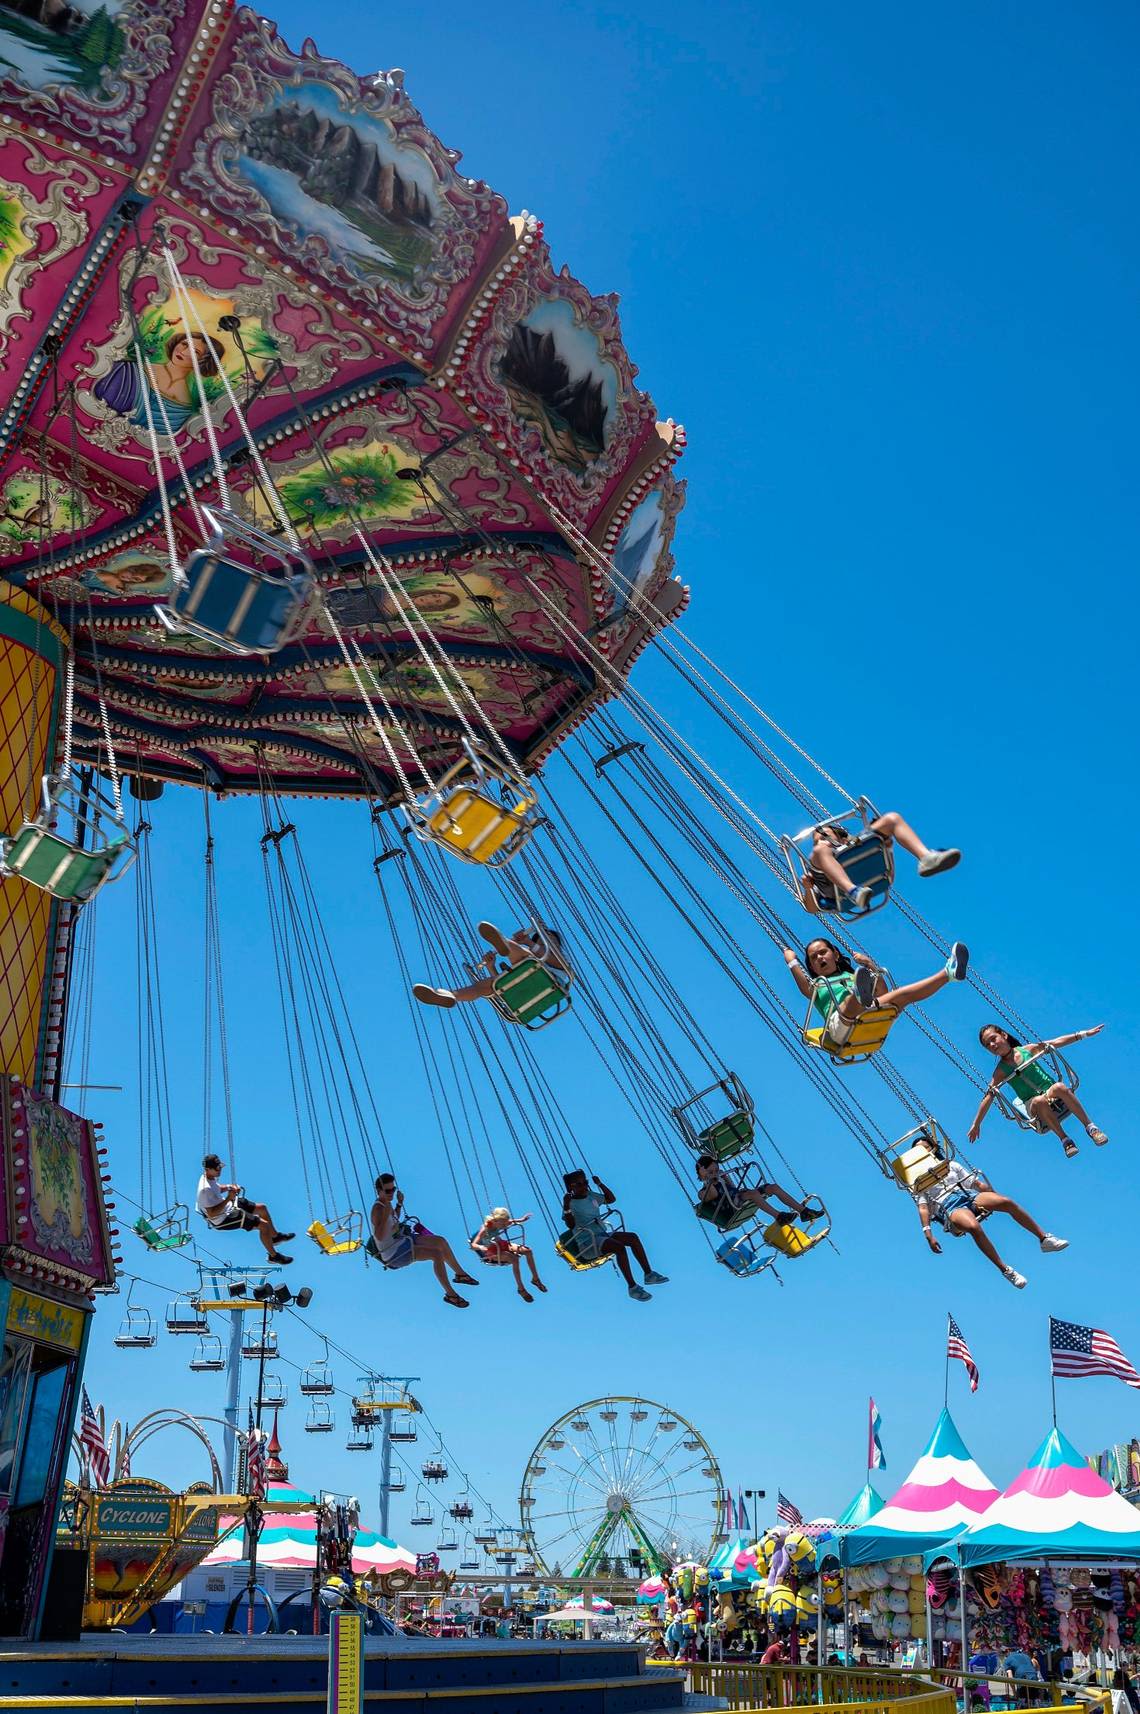 How far does $50 go at the California State Fair? Your guide to fun and food on a budget